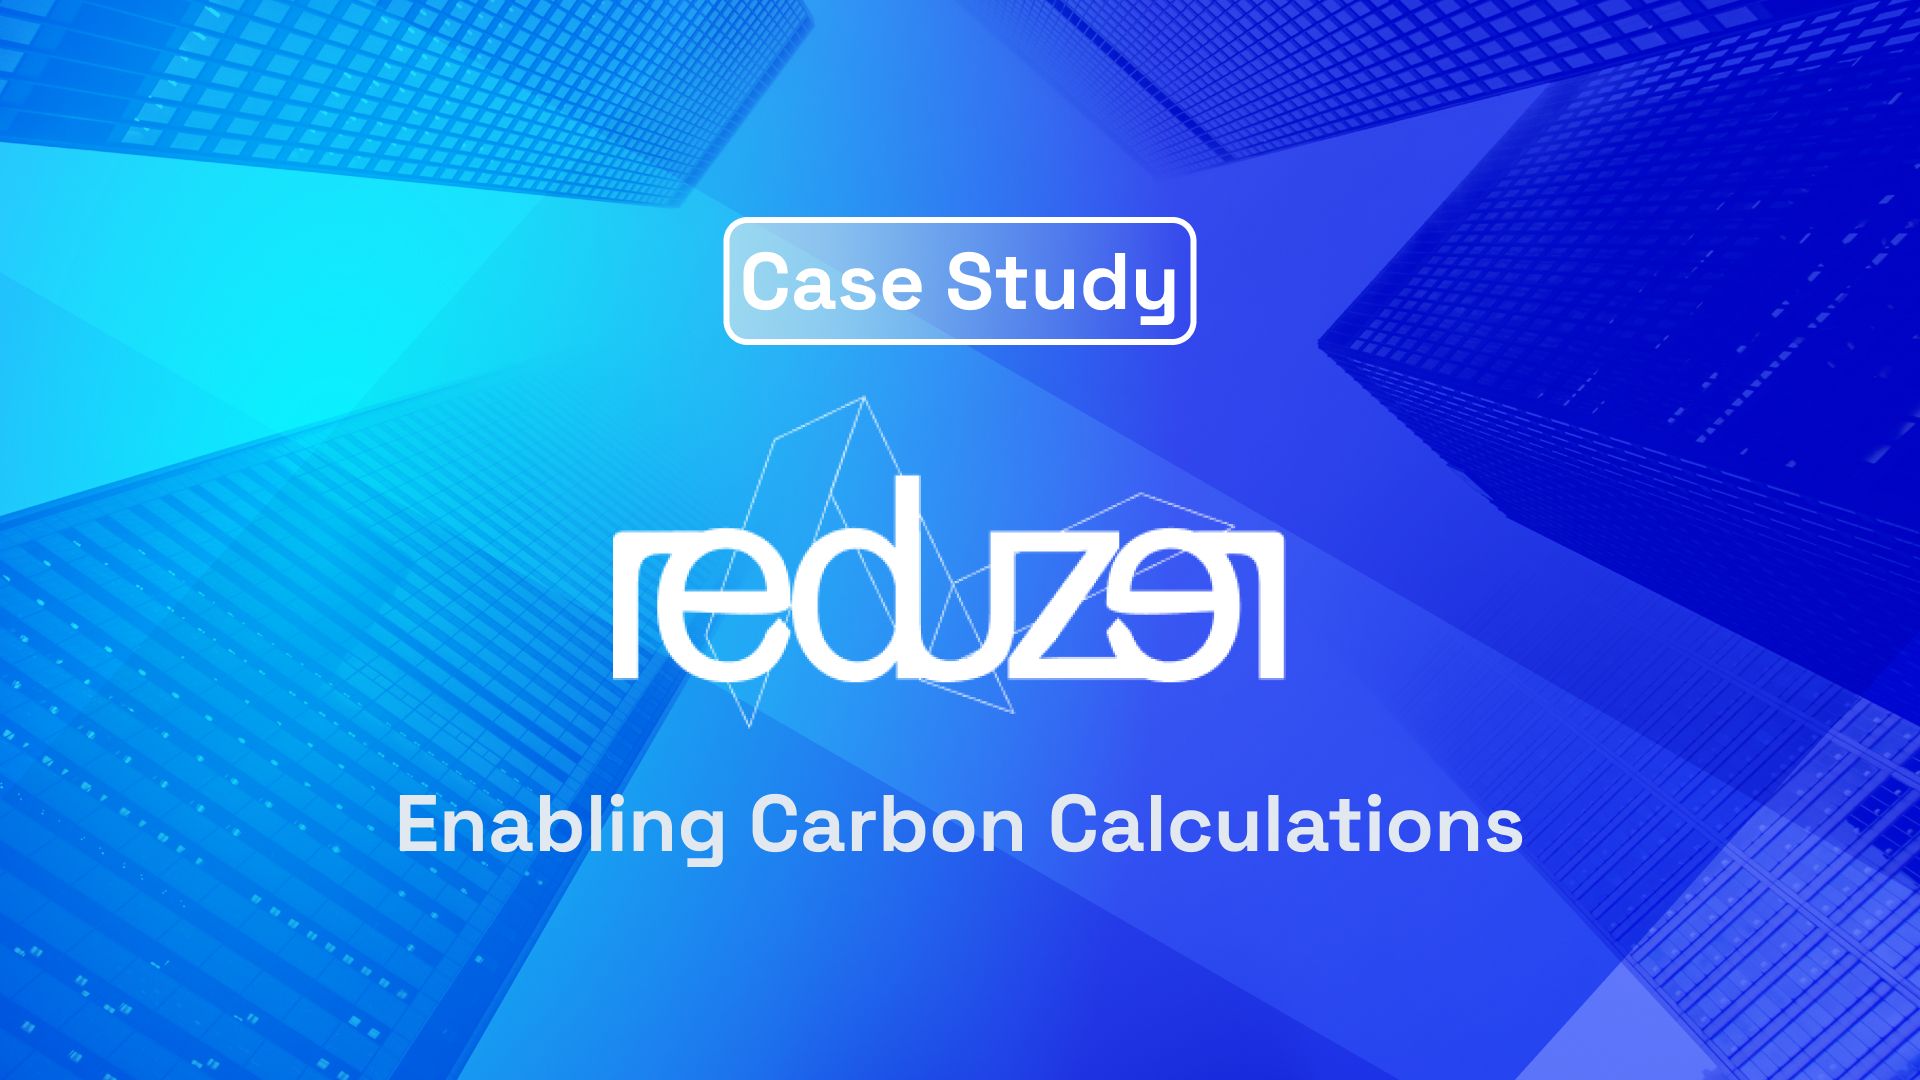 Enabling Business Leaders to Achieve Carbon Calculations